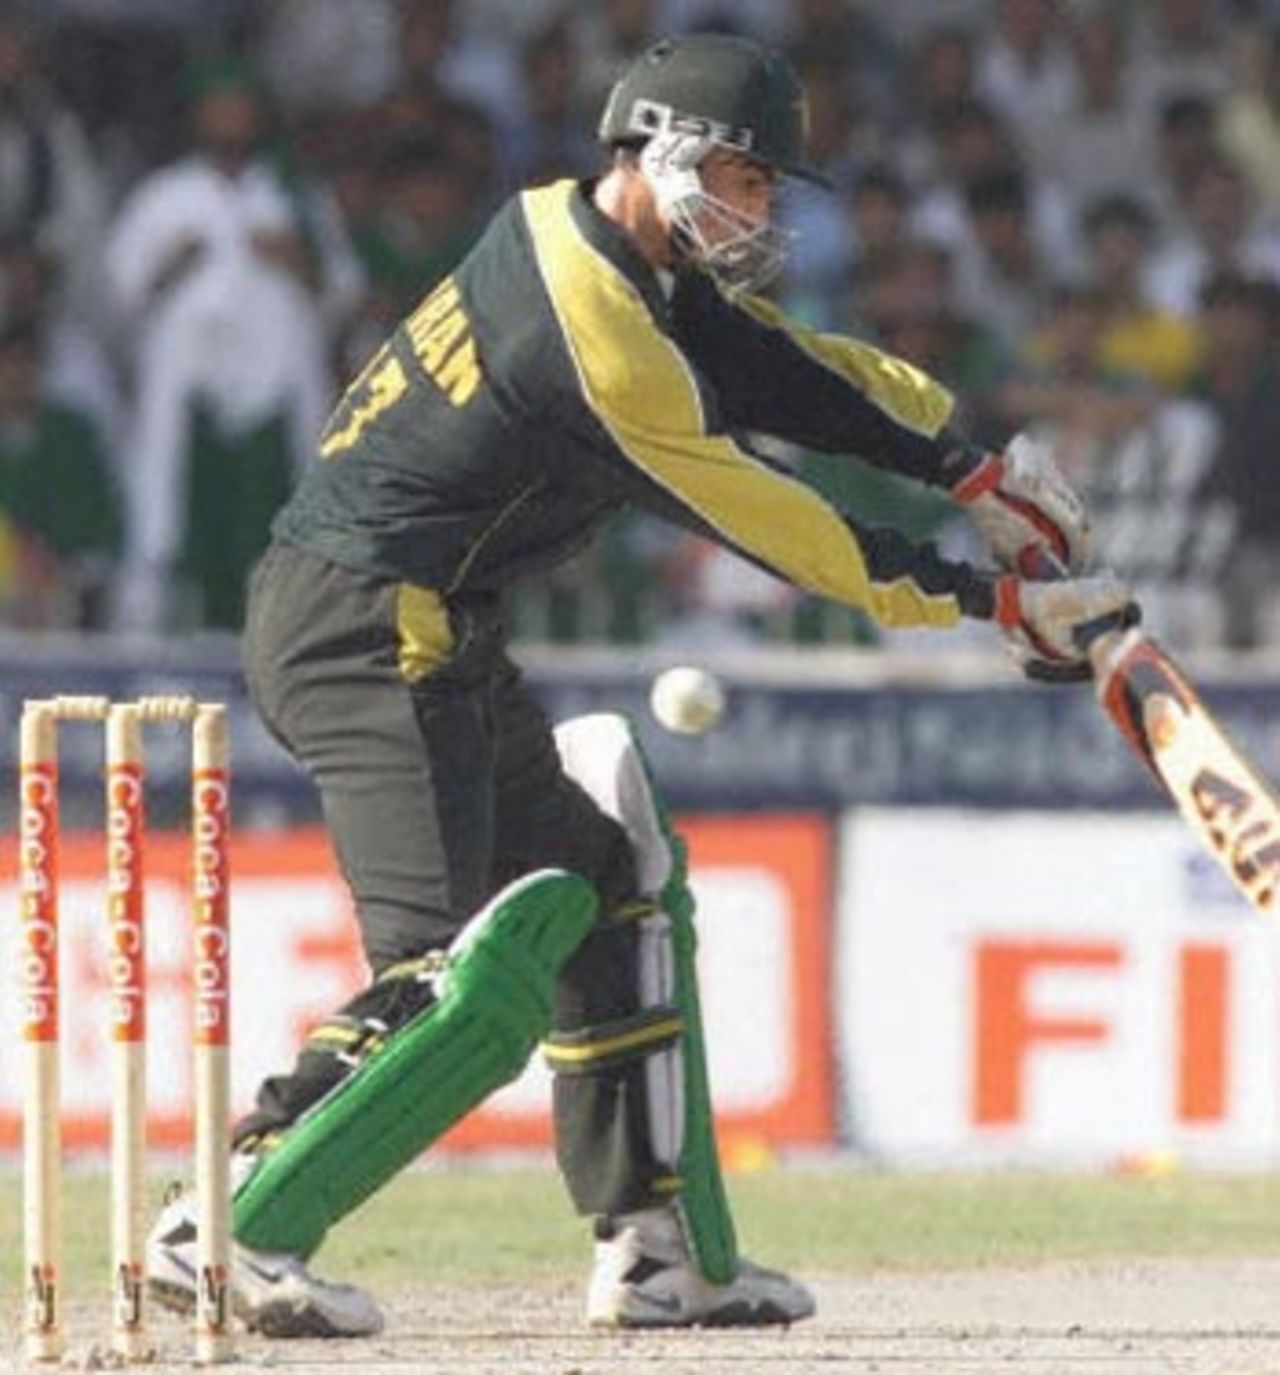 Pakistani batsman Imran Nazir plays and misses at a ball from South African bowler Steve Elworthy during the three-nation cricket Sharjah Cup final in Sharjah 31 March 2000